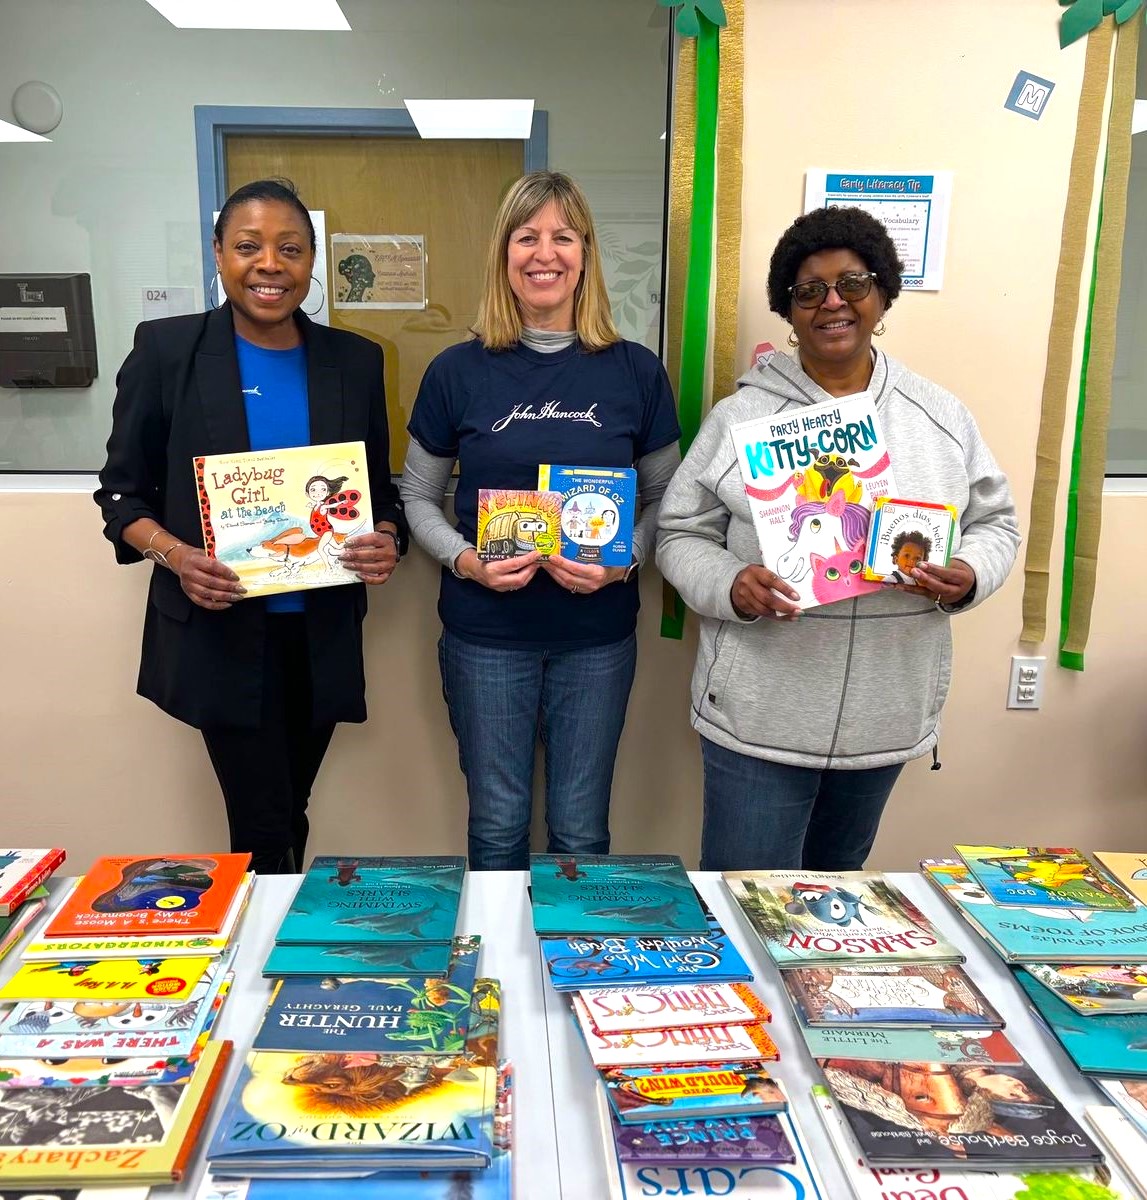 This week, Dimock was lucky to have 3 amazing volunteers from John Hancock join our Child & Family Services department for their Literacy Week book swap! Thank you, John Hancock, for helping make sure that all kids in our community have access to a wide variety of books! 💛